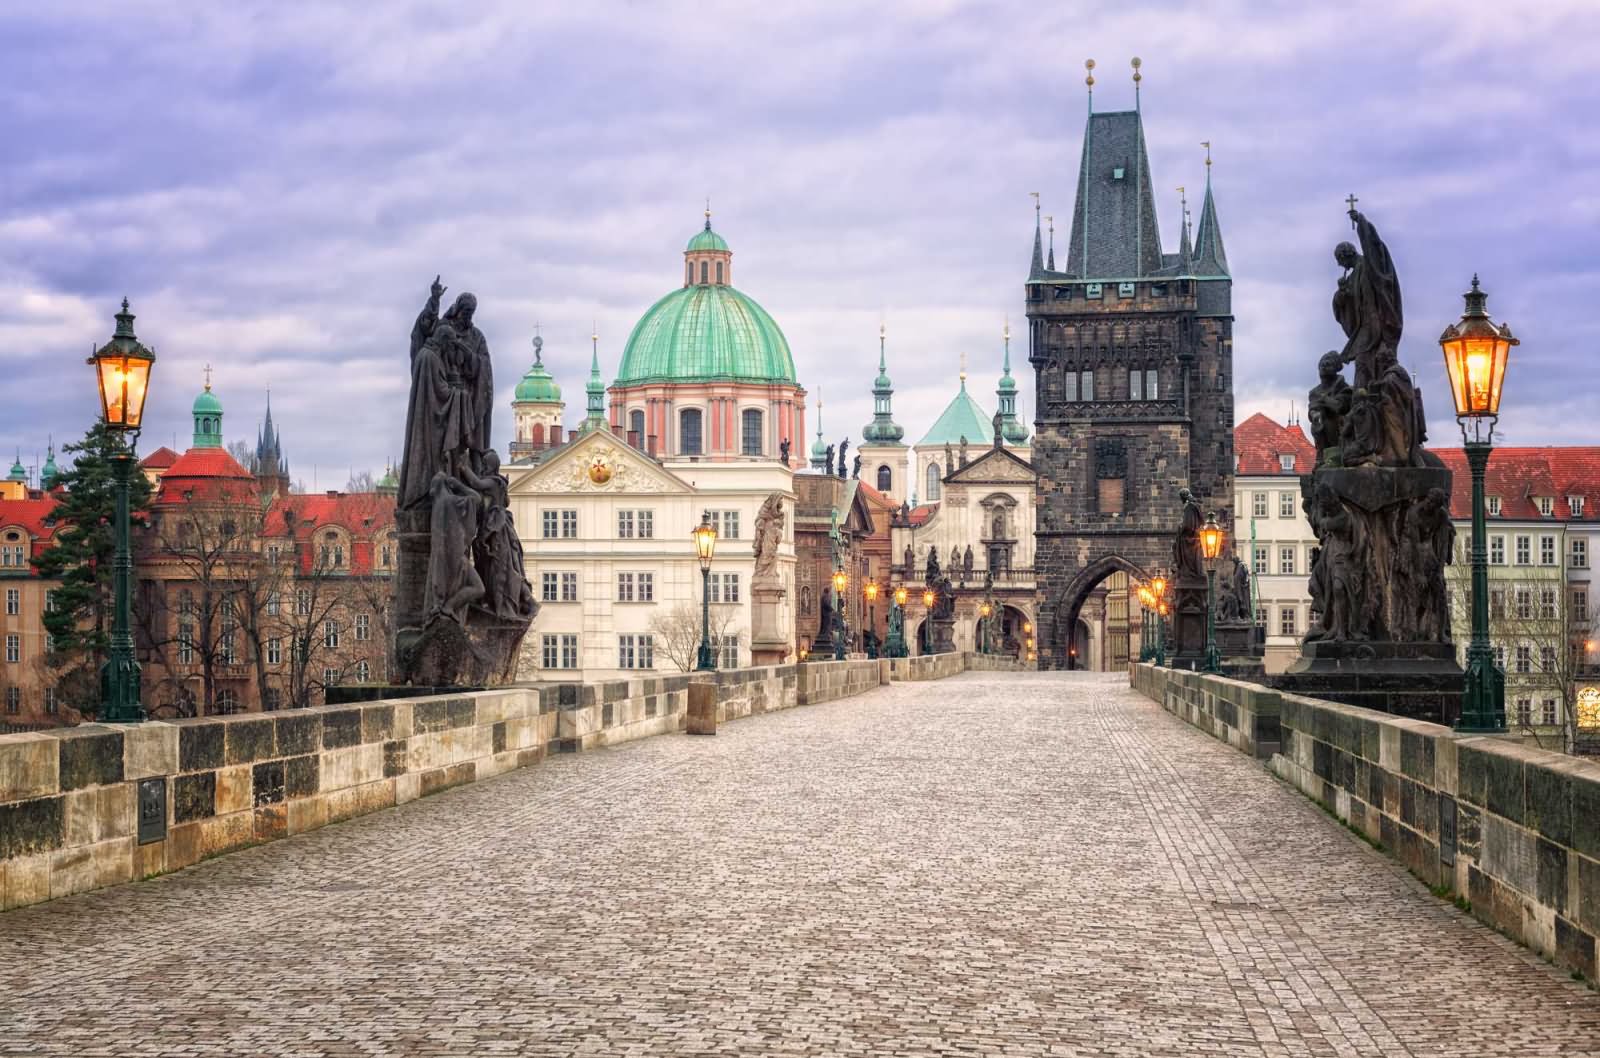 40 Very Beautiful Charles Bridge, Prague Pictures And Images